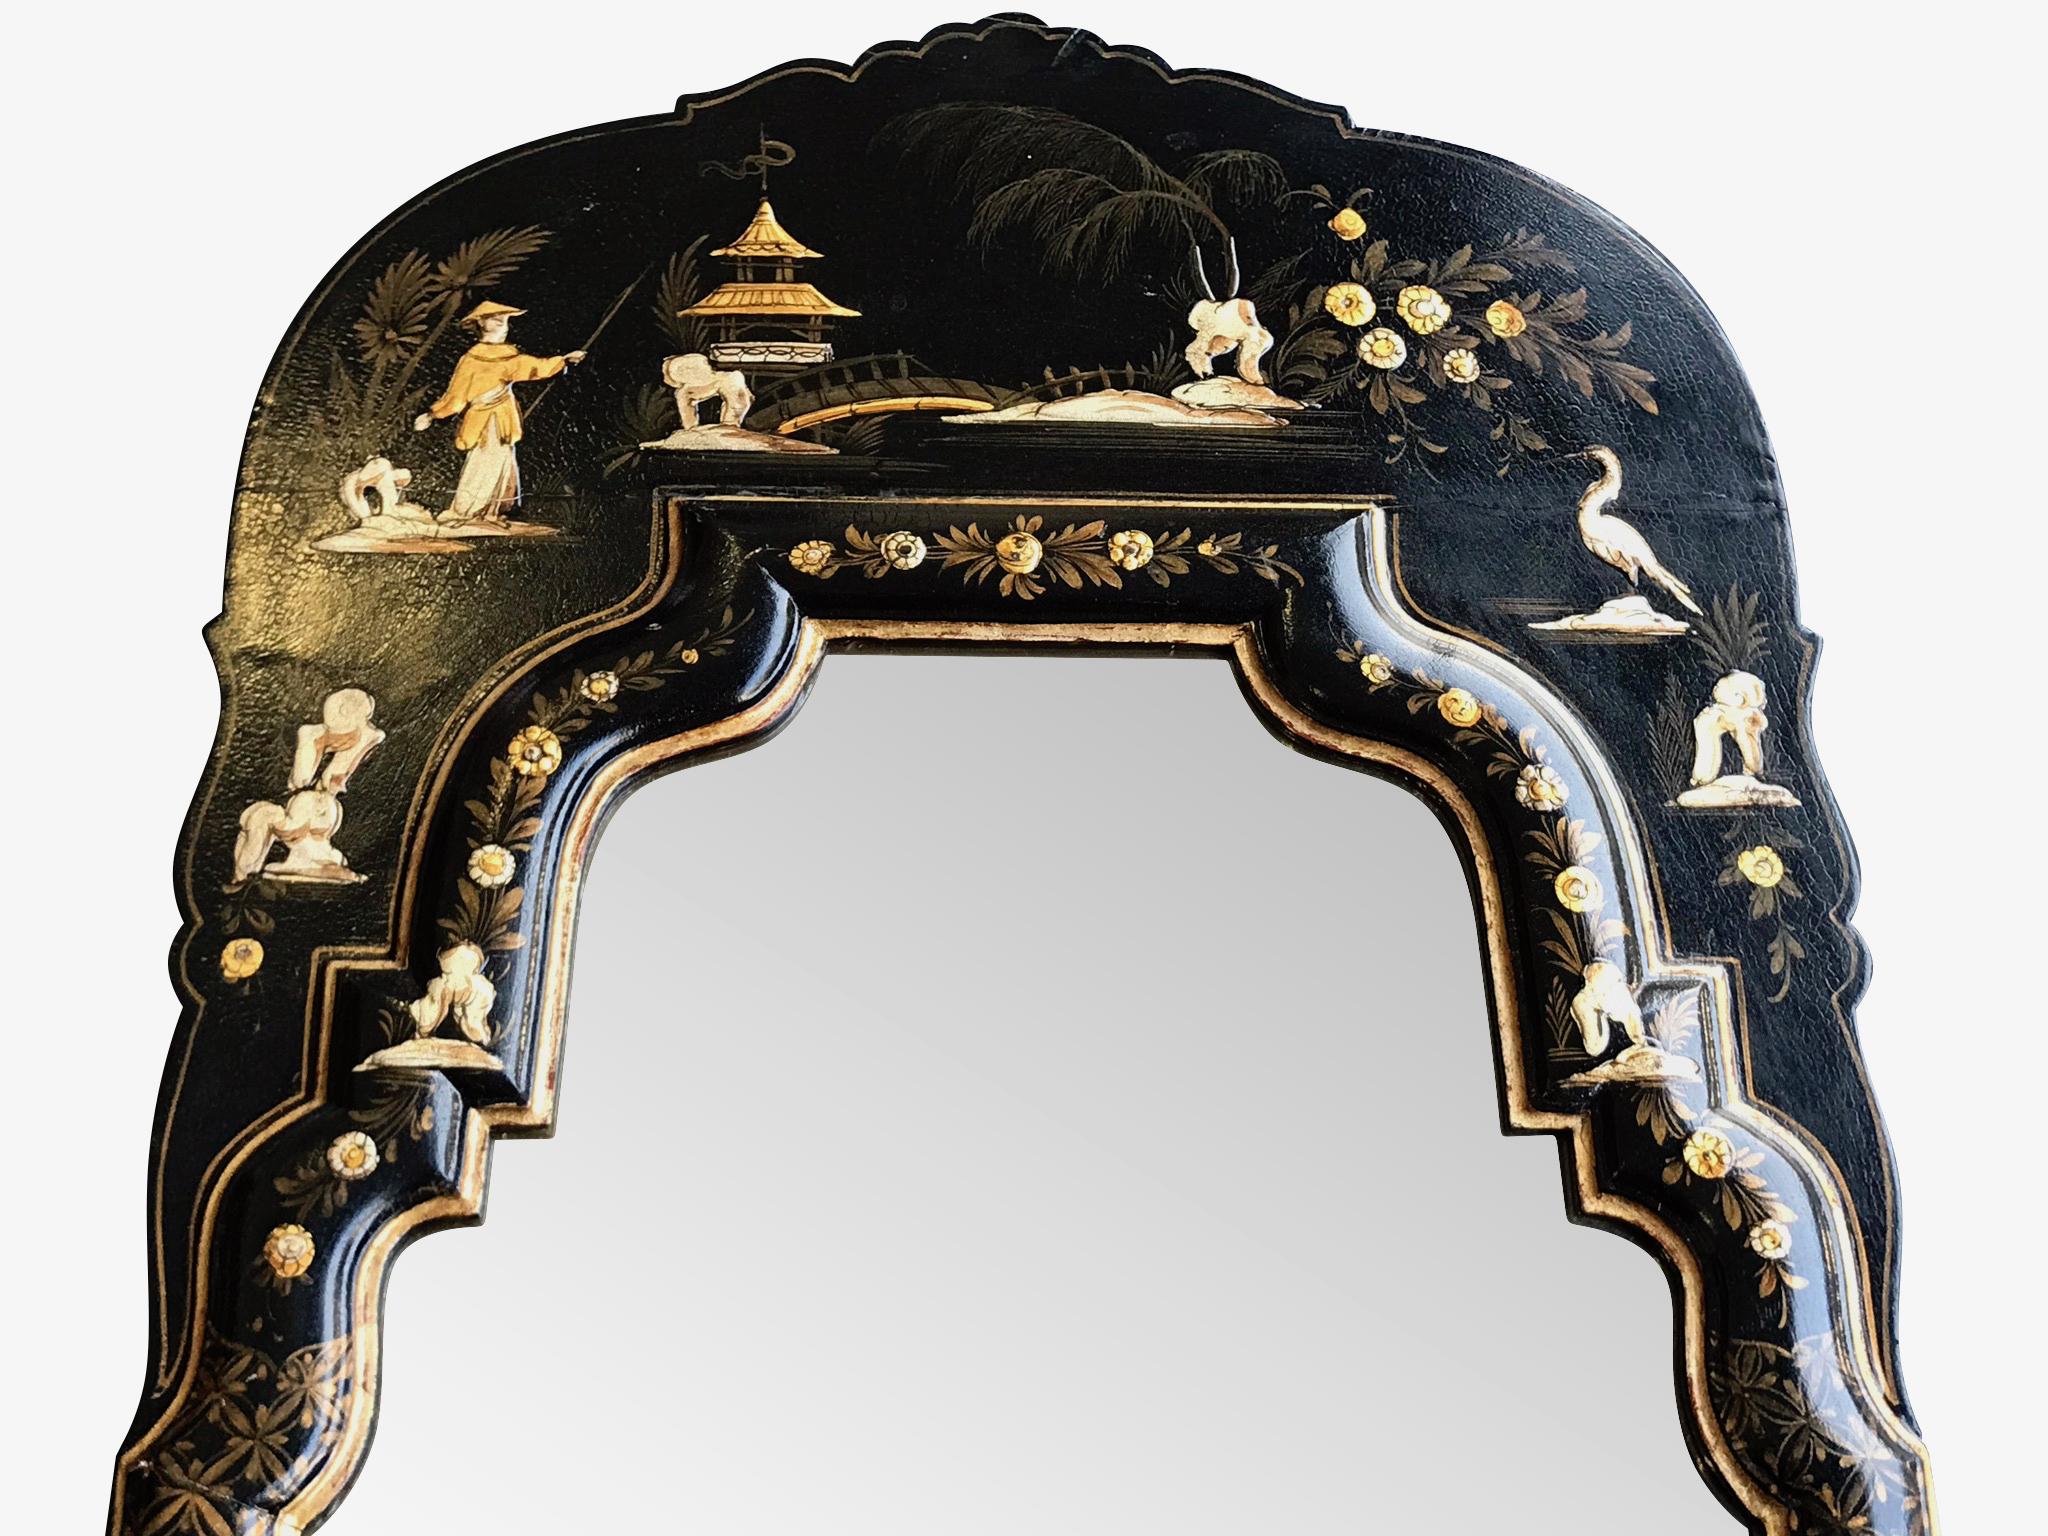 A chinoiserie mirror with arched top and black and gold lacquer frame with painted details of birds, figures and flowers in white and gold. With original makers label on reverse. 